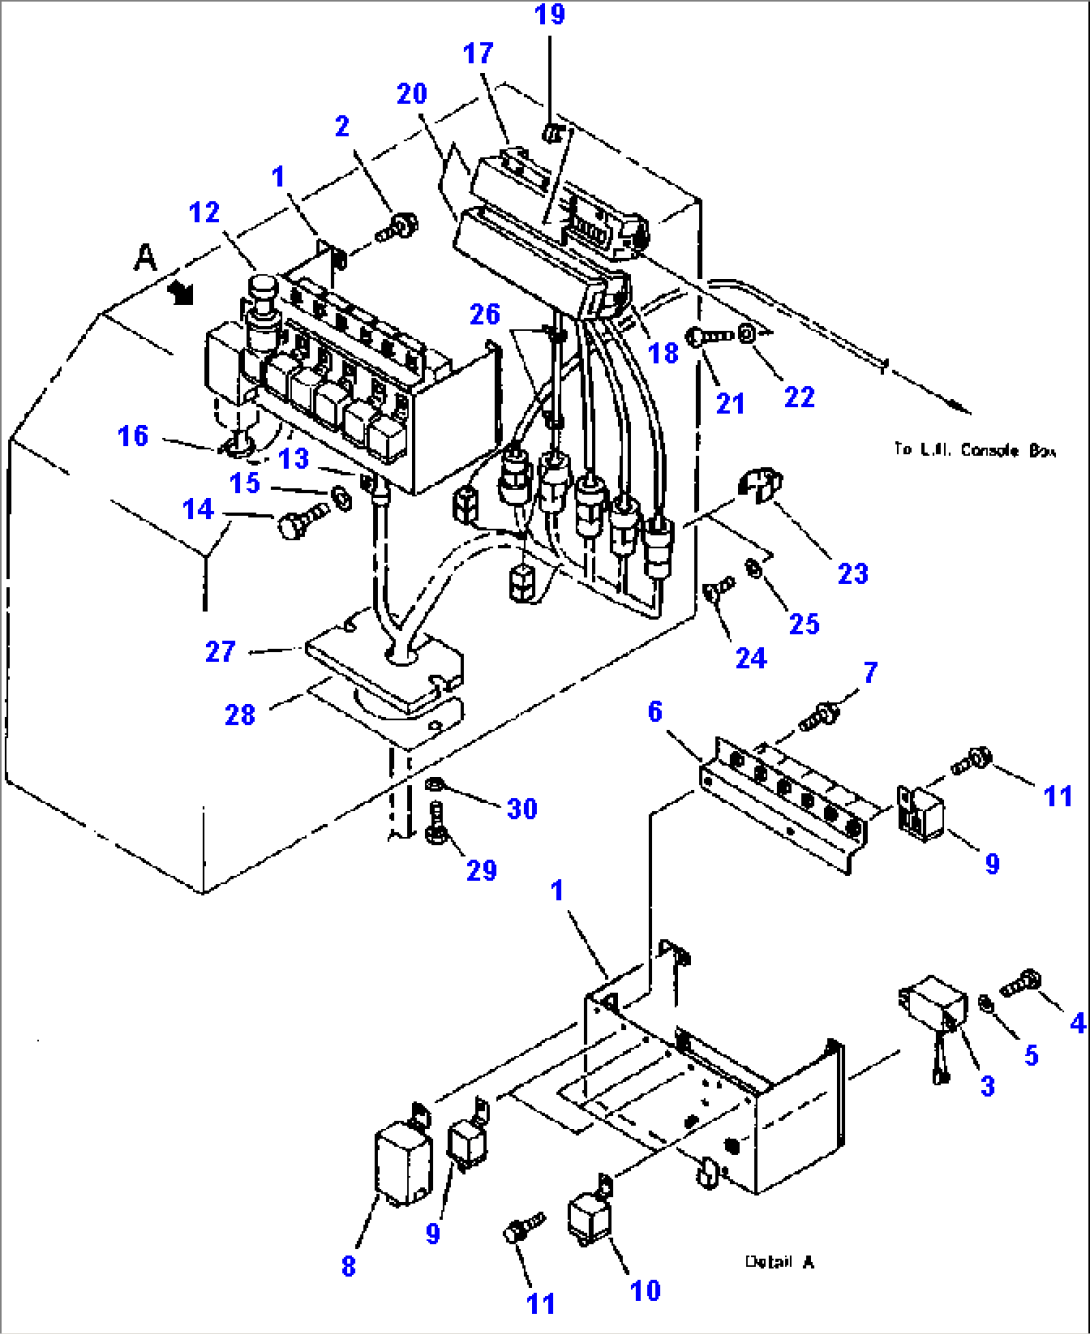 FIG NO. 1431 ELECTRICAL SYSTEM - R.H. CONSOLE